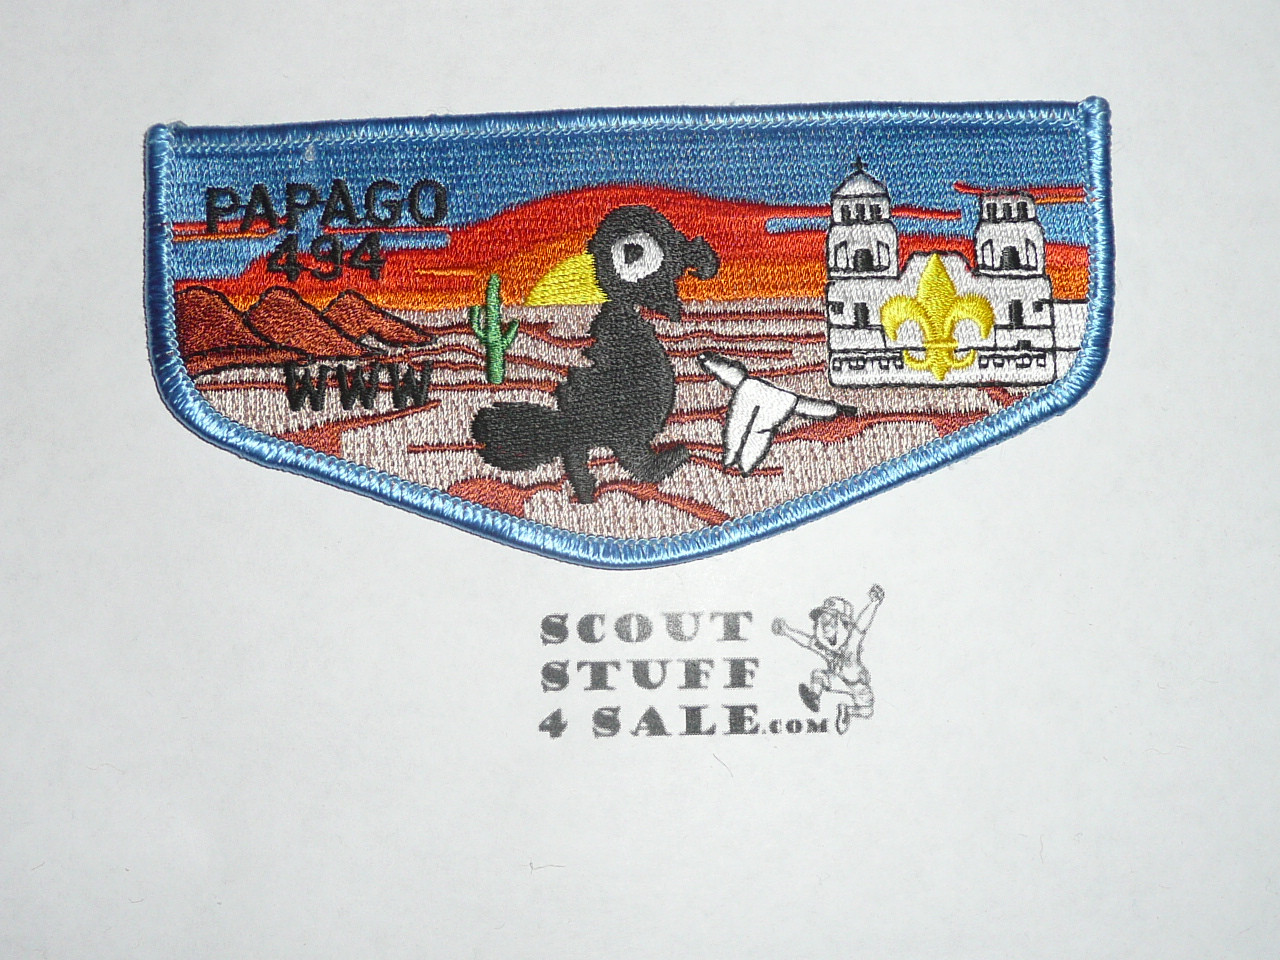 Order of the Arrow Lodge #494 Papago s20 Flap Patch